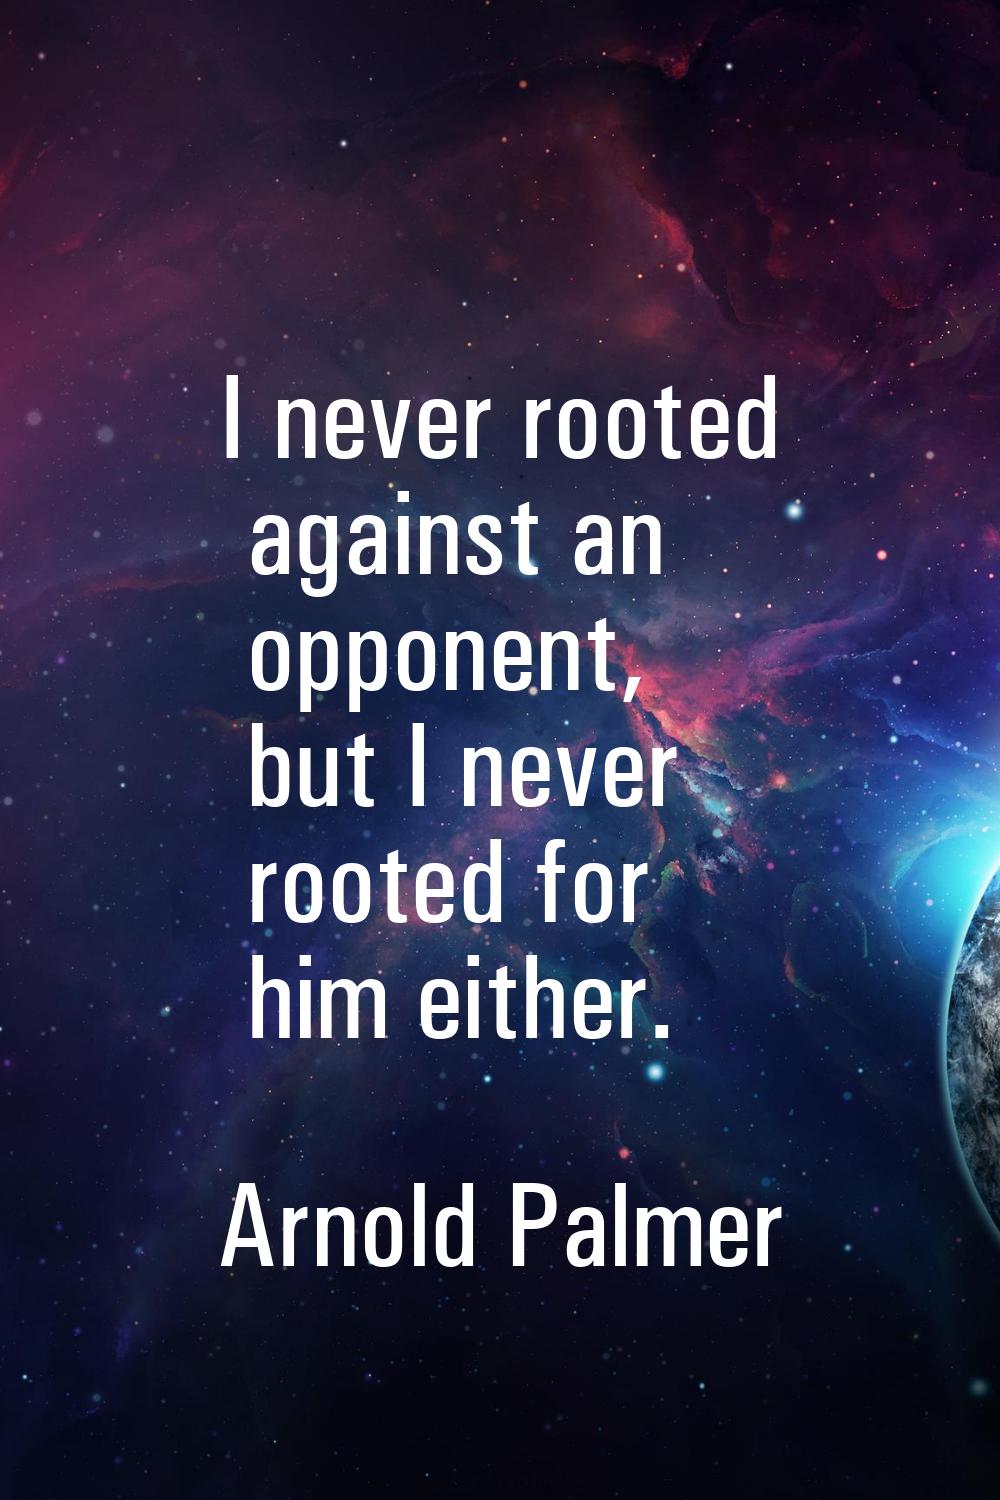 I never rooted against an opponent, but I never rooted for him either.